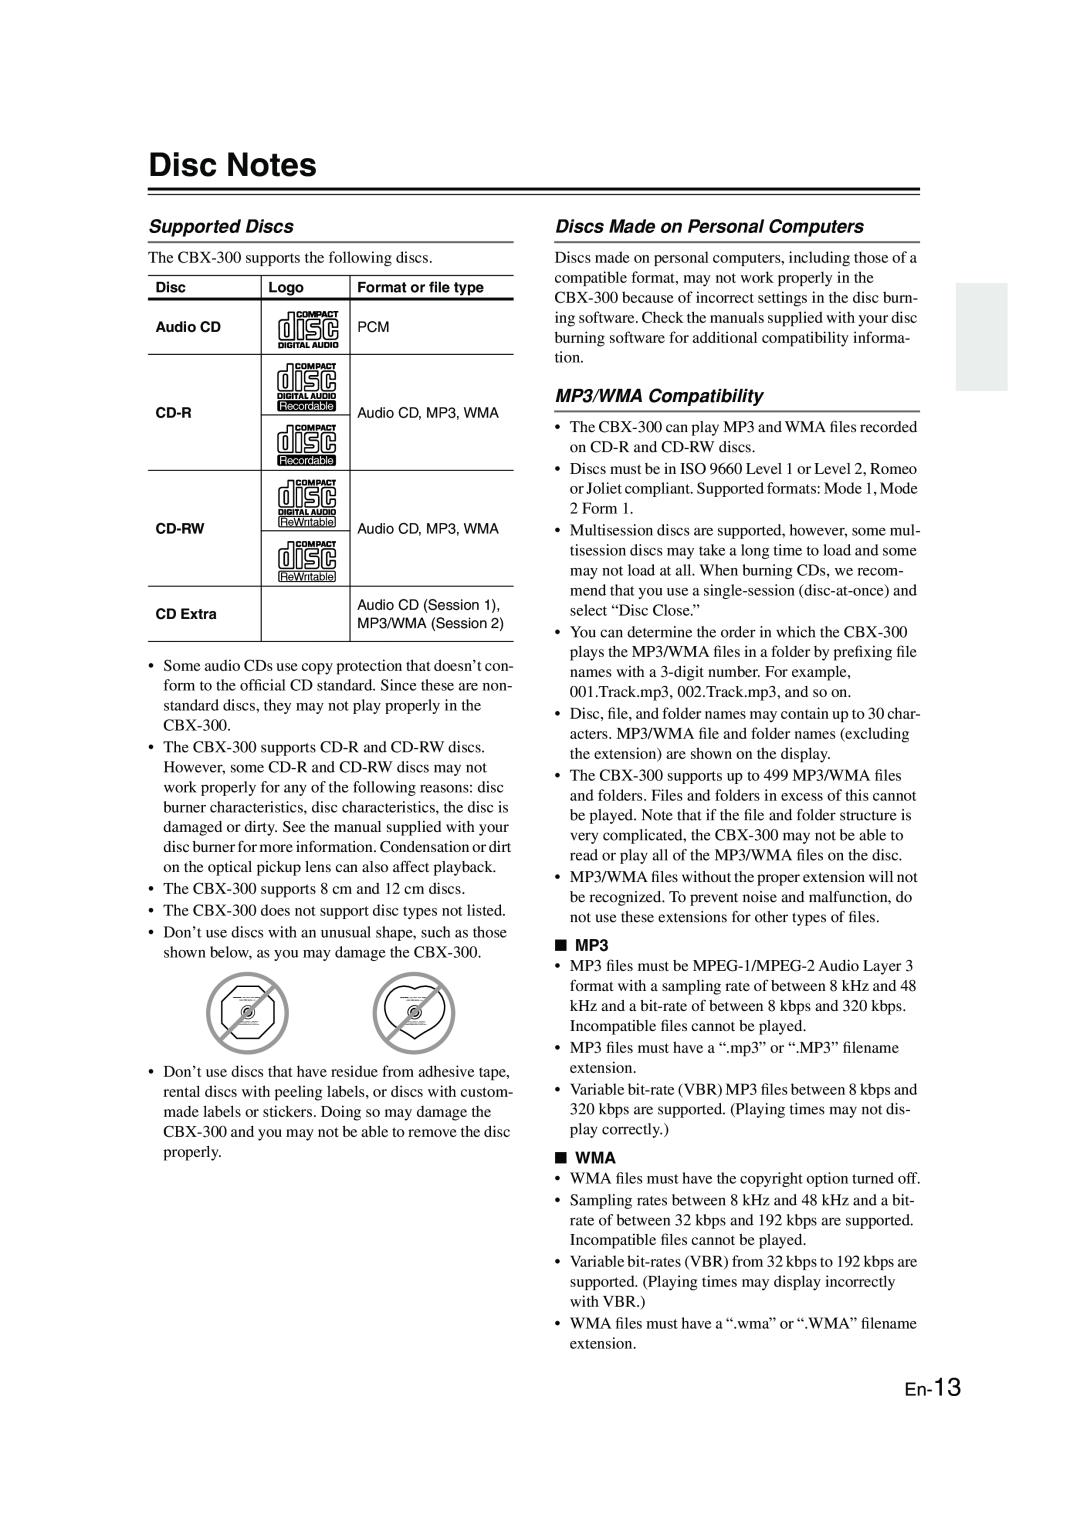 Onkyo CBX-300 Disc Notes, Supported Discs, Discs Made on Personal Computers, MP3/WMA Compatibility, En-13 